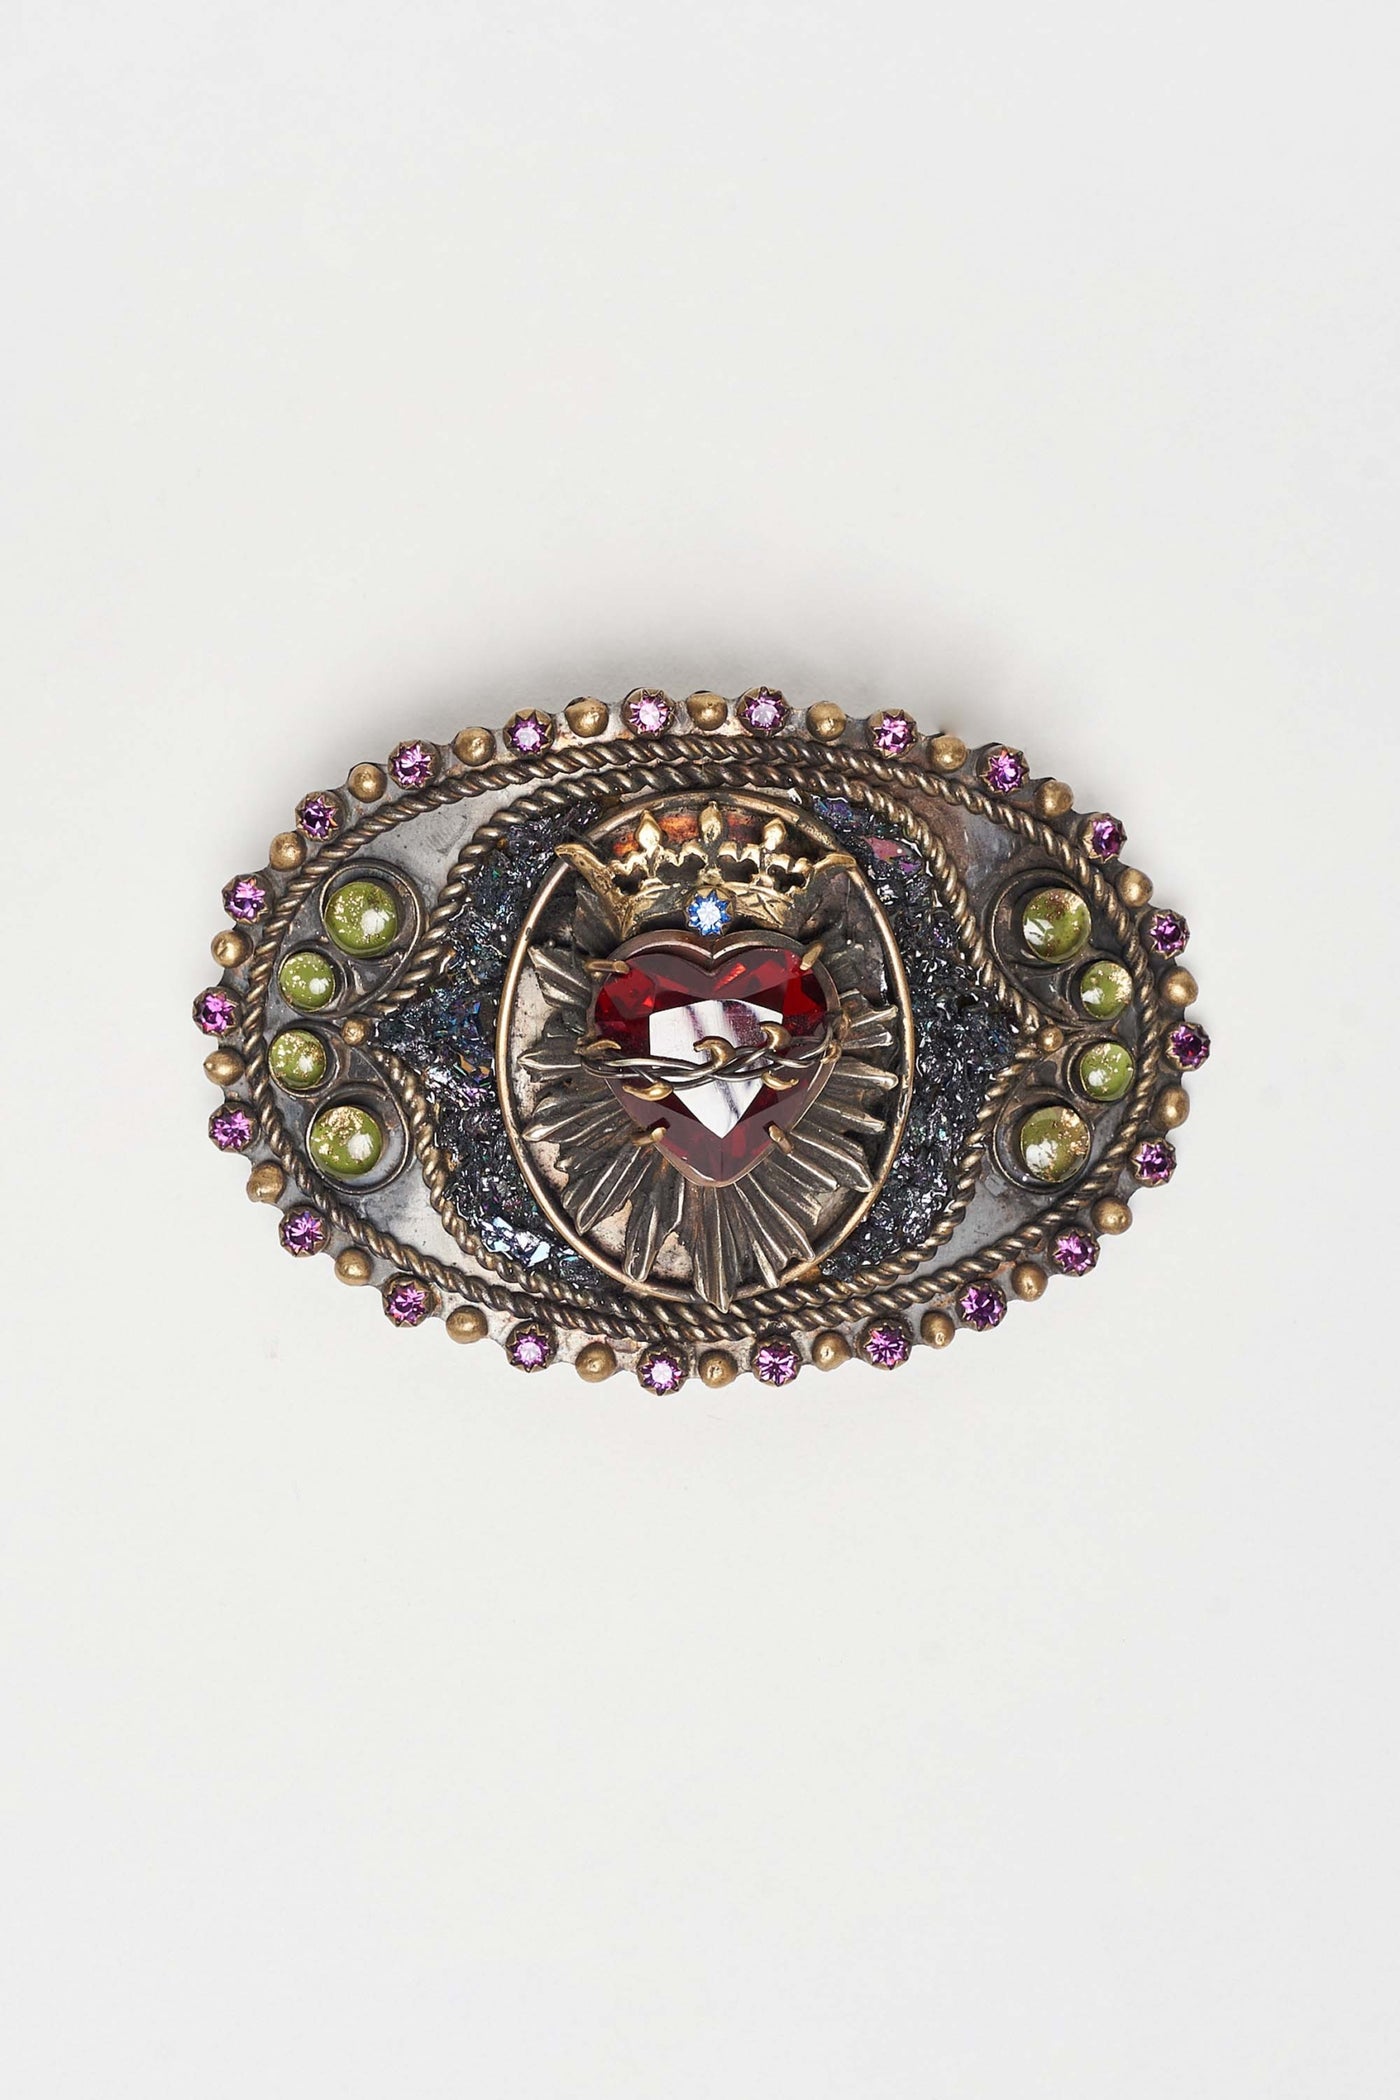 CORAZON SAGRADO BUCKLE WITH CRYSTALS AND FACETED GLASS